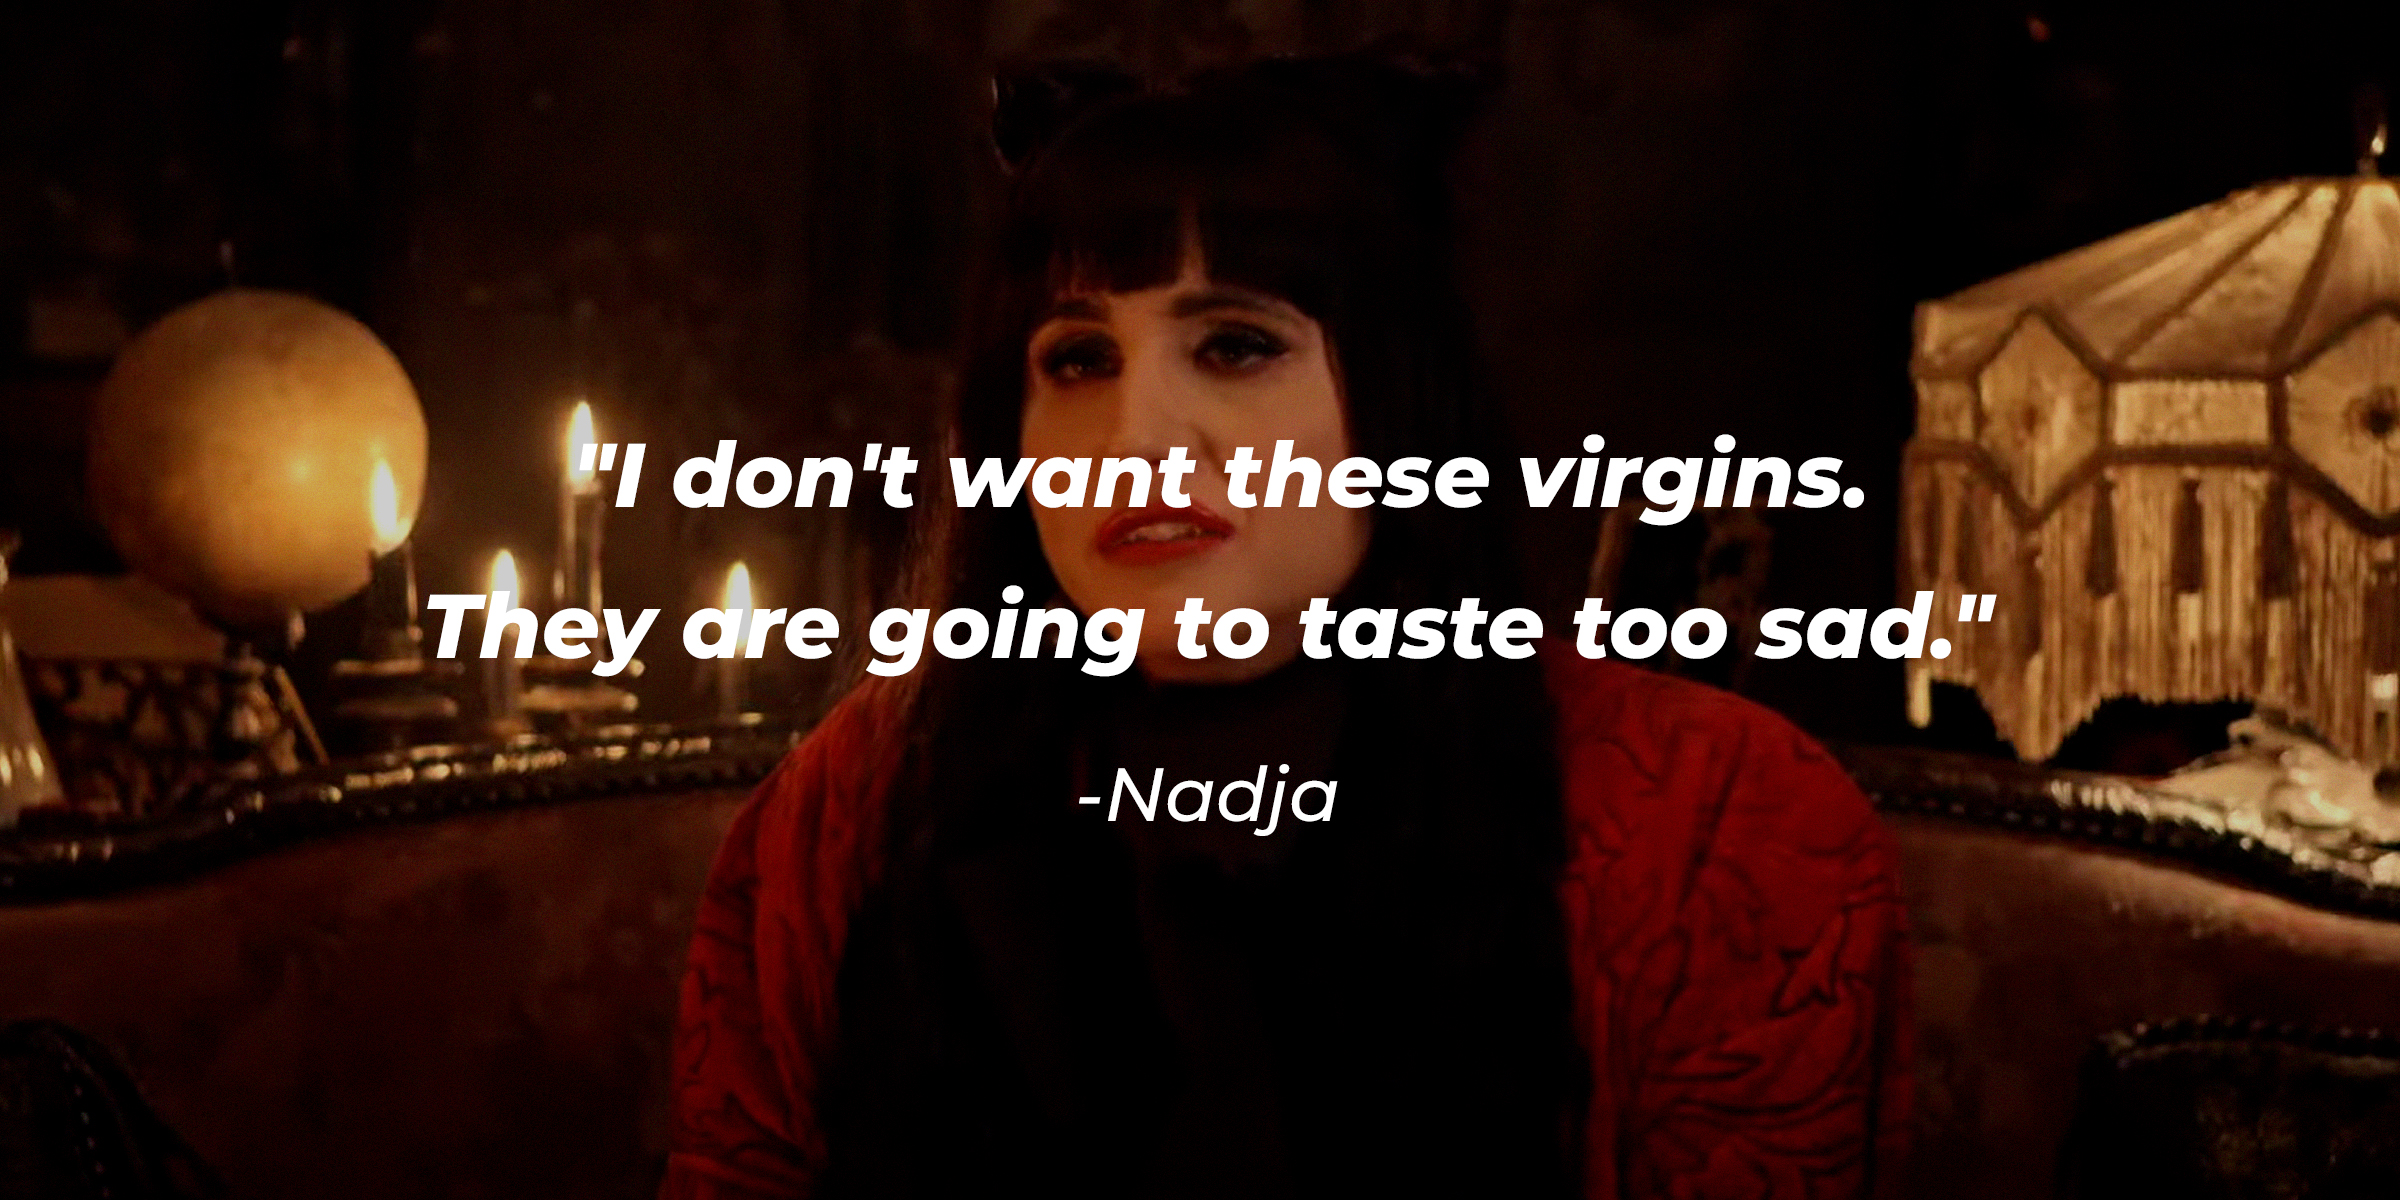 Nadja’s quote: "I don't want these virgins. They are going to taste too sad." | Source: Facebook.com/TheShadowsFX